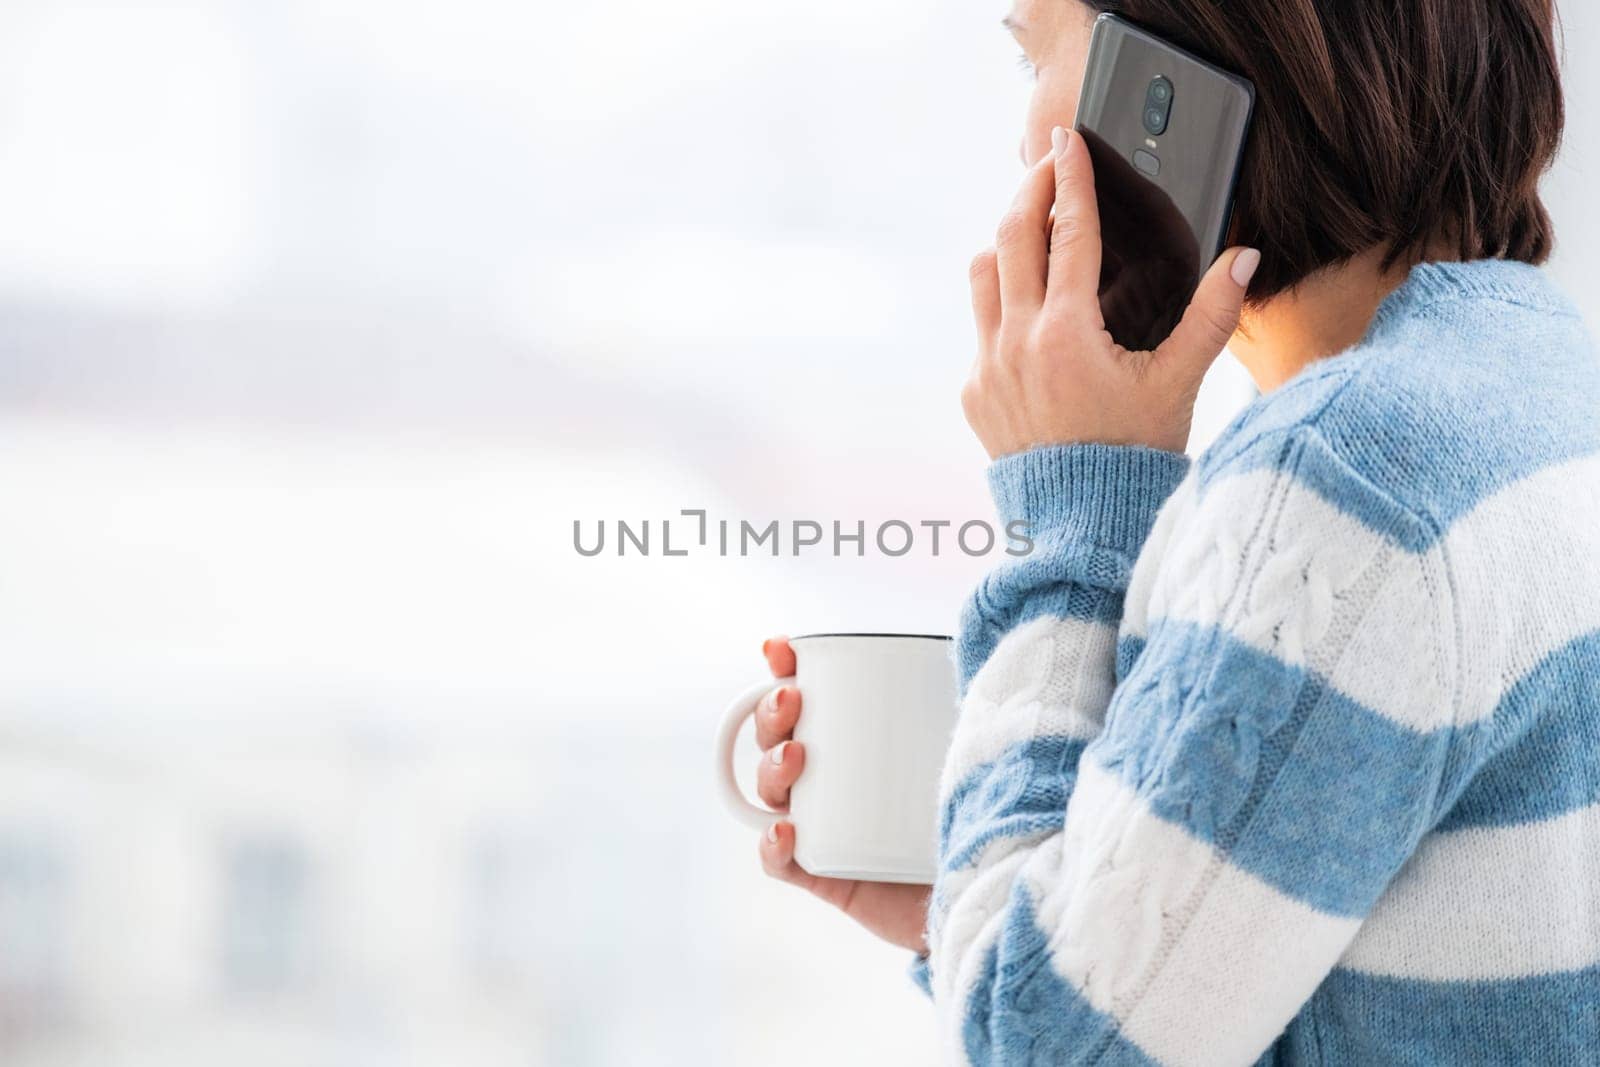 Girl talking on phone while drinking from cup